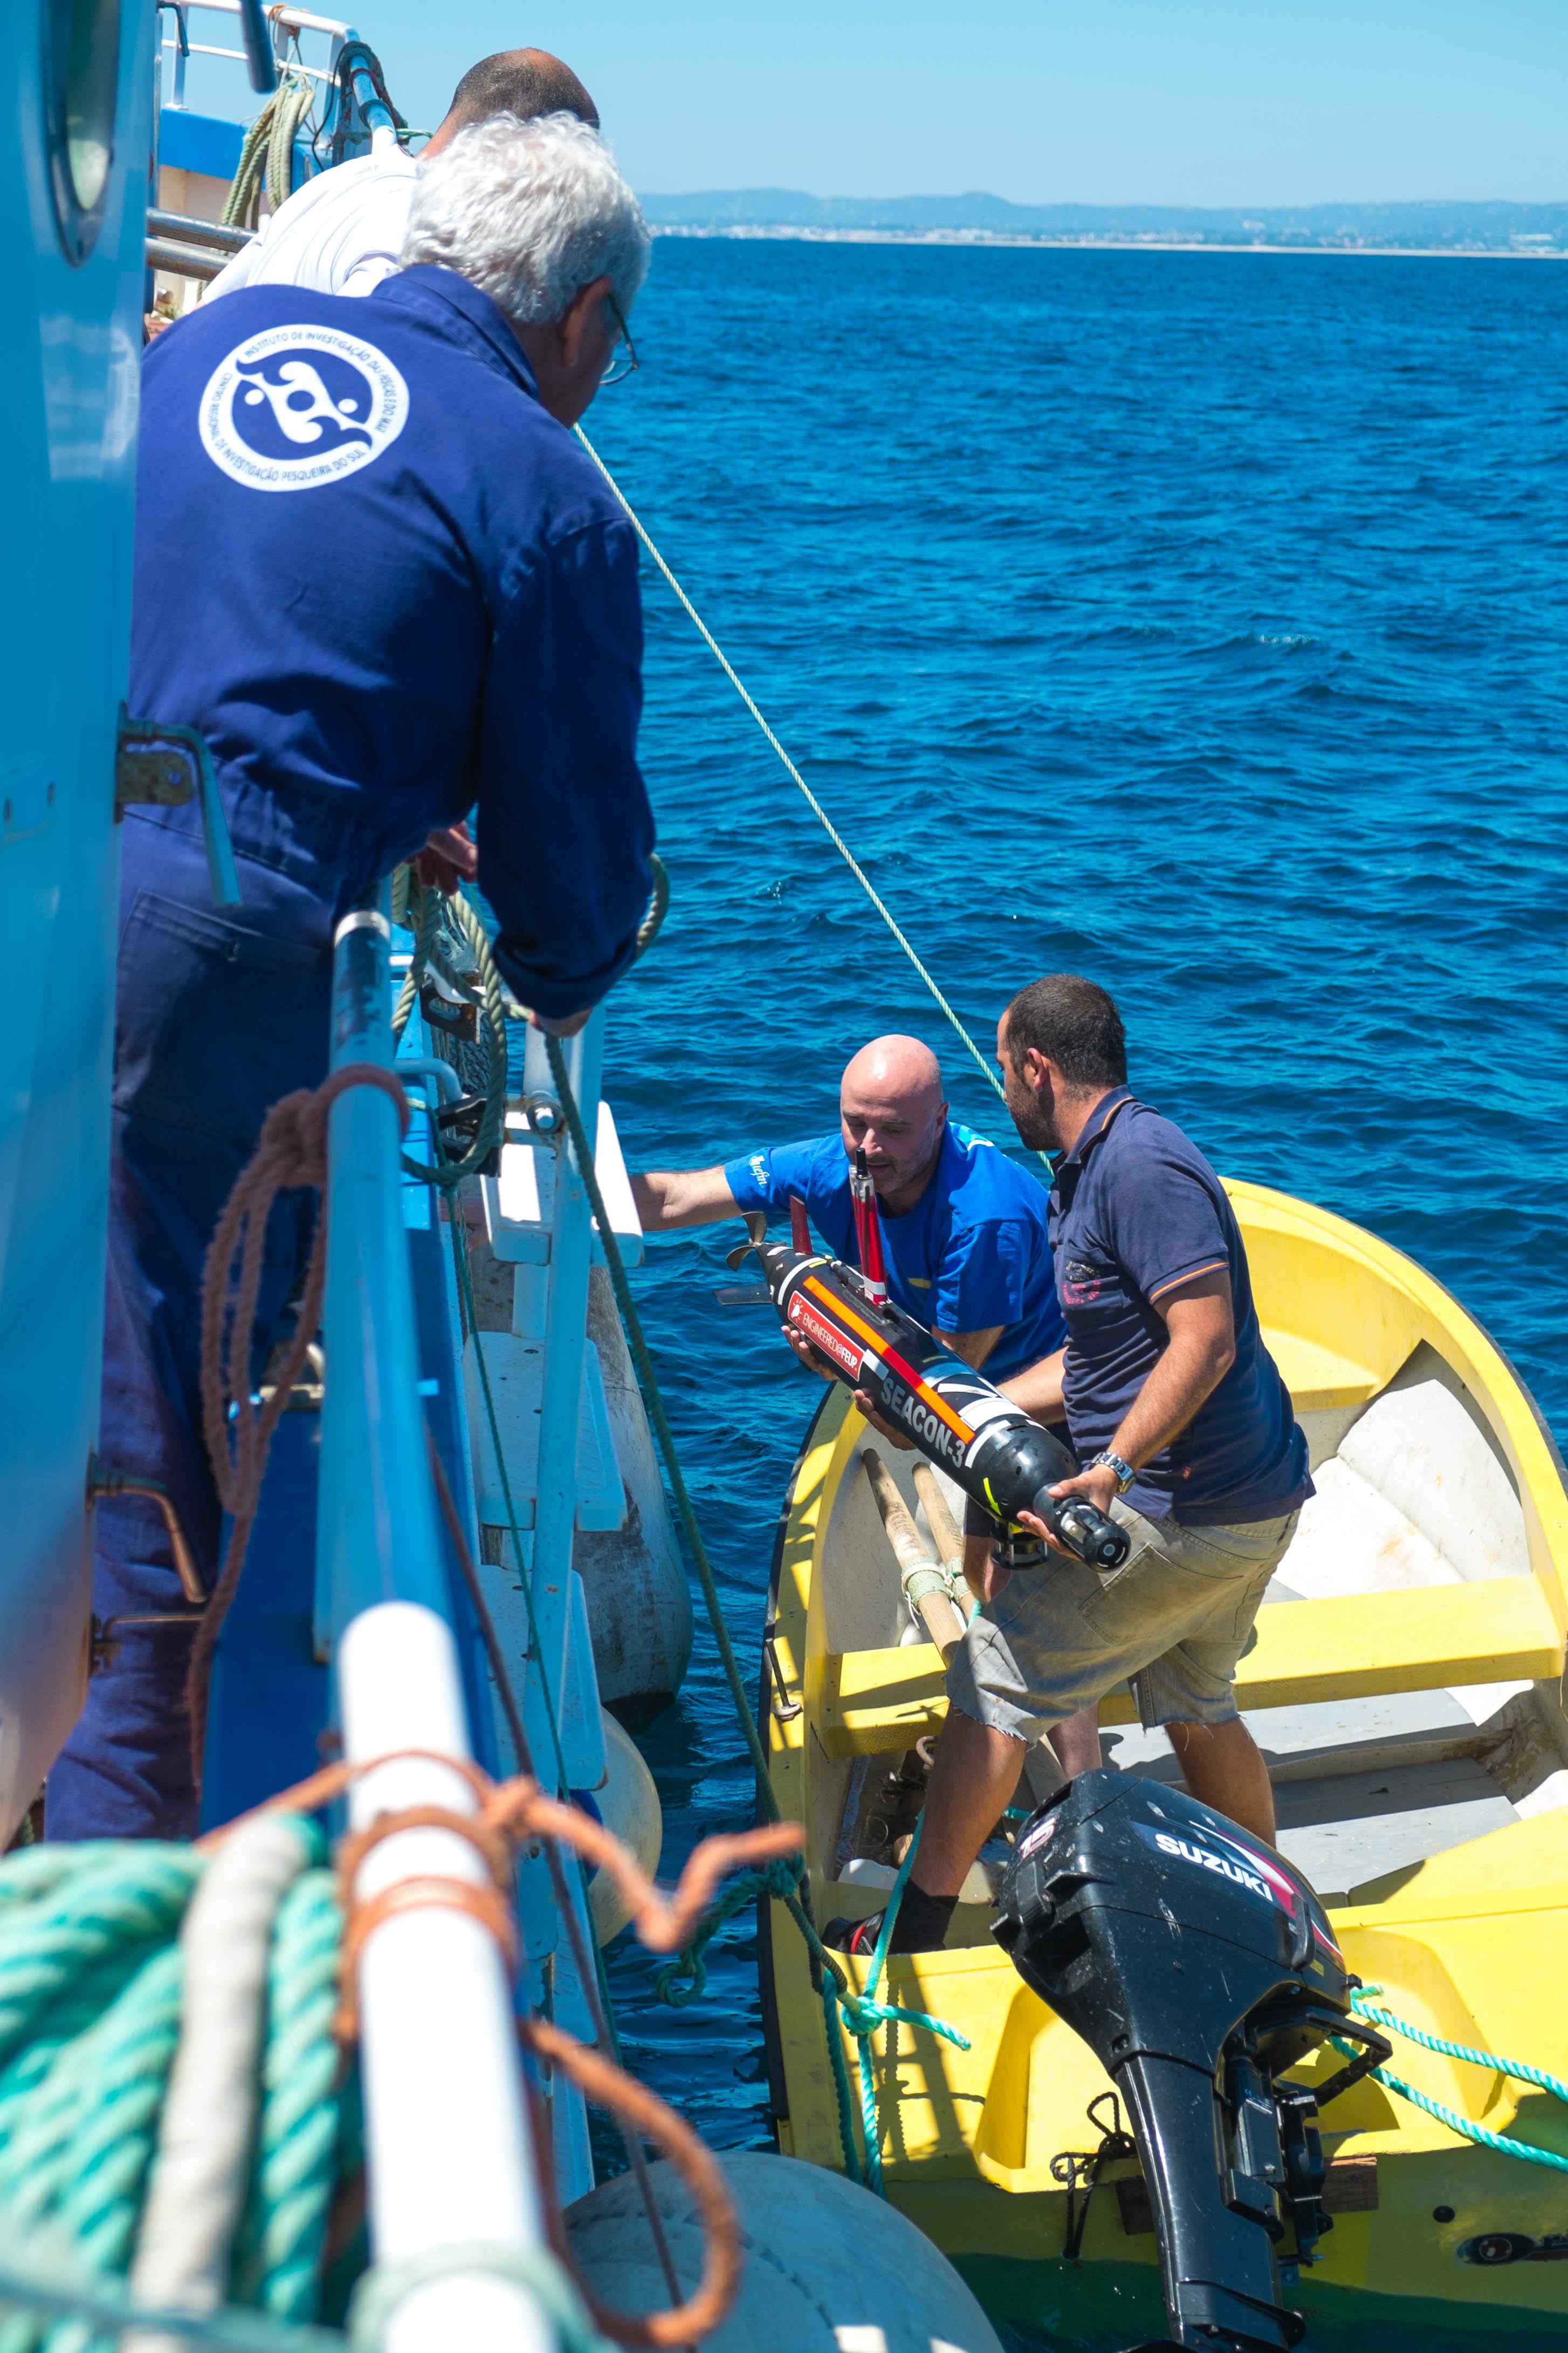 Joao Tasso transferring the Seacon AUV from the Diplodous prior to launch. Unlike the Xplore1, the Seacon's outer shell and the nose is more sensitive to being dropped from the ship, making its launch/recovery more complex. As an older (but reliable) vehicle this and another Seacon will be our backup to the Xplore even if their onboard battery life is only about 5 hours in comparison to nearly 24 hours for the Xplore.